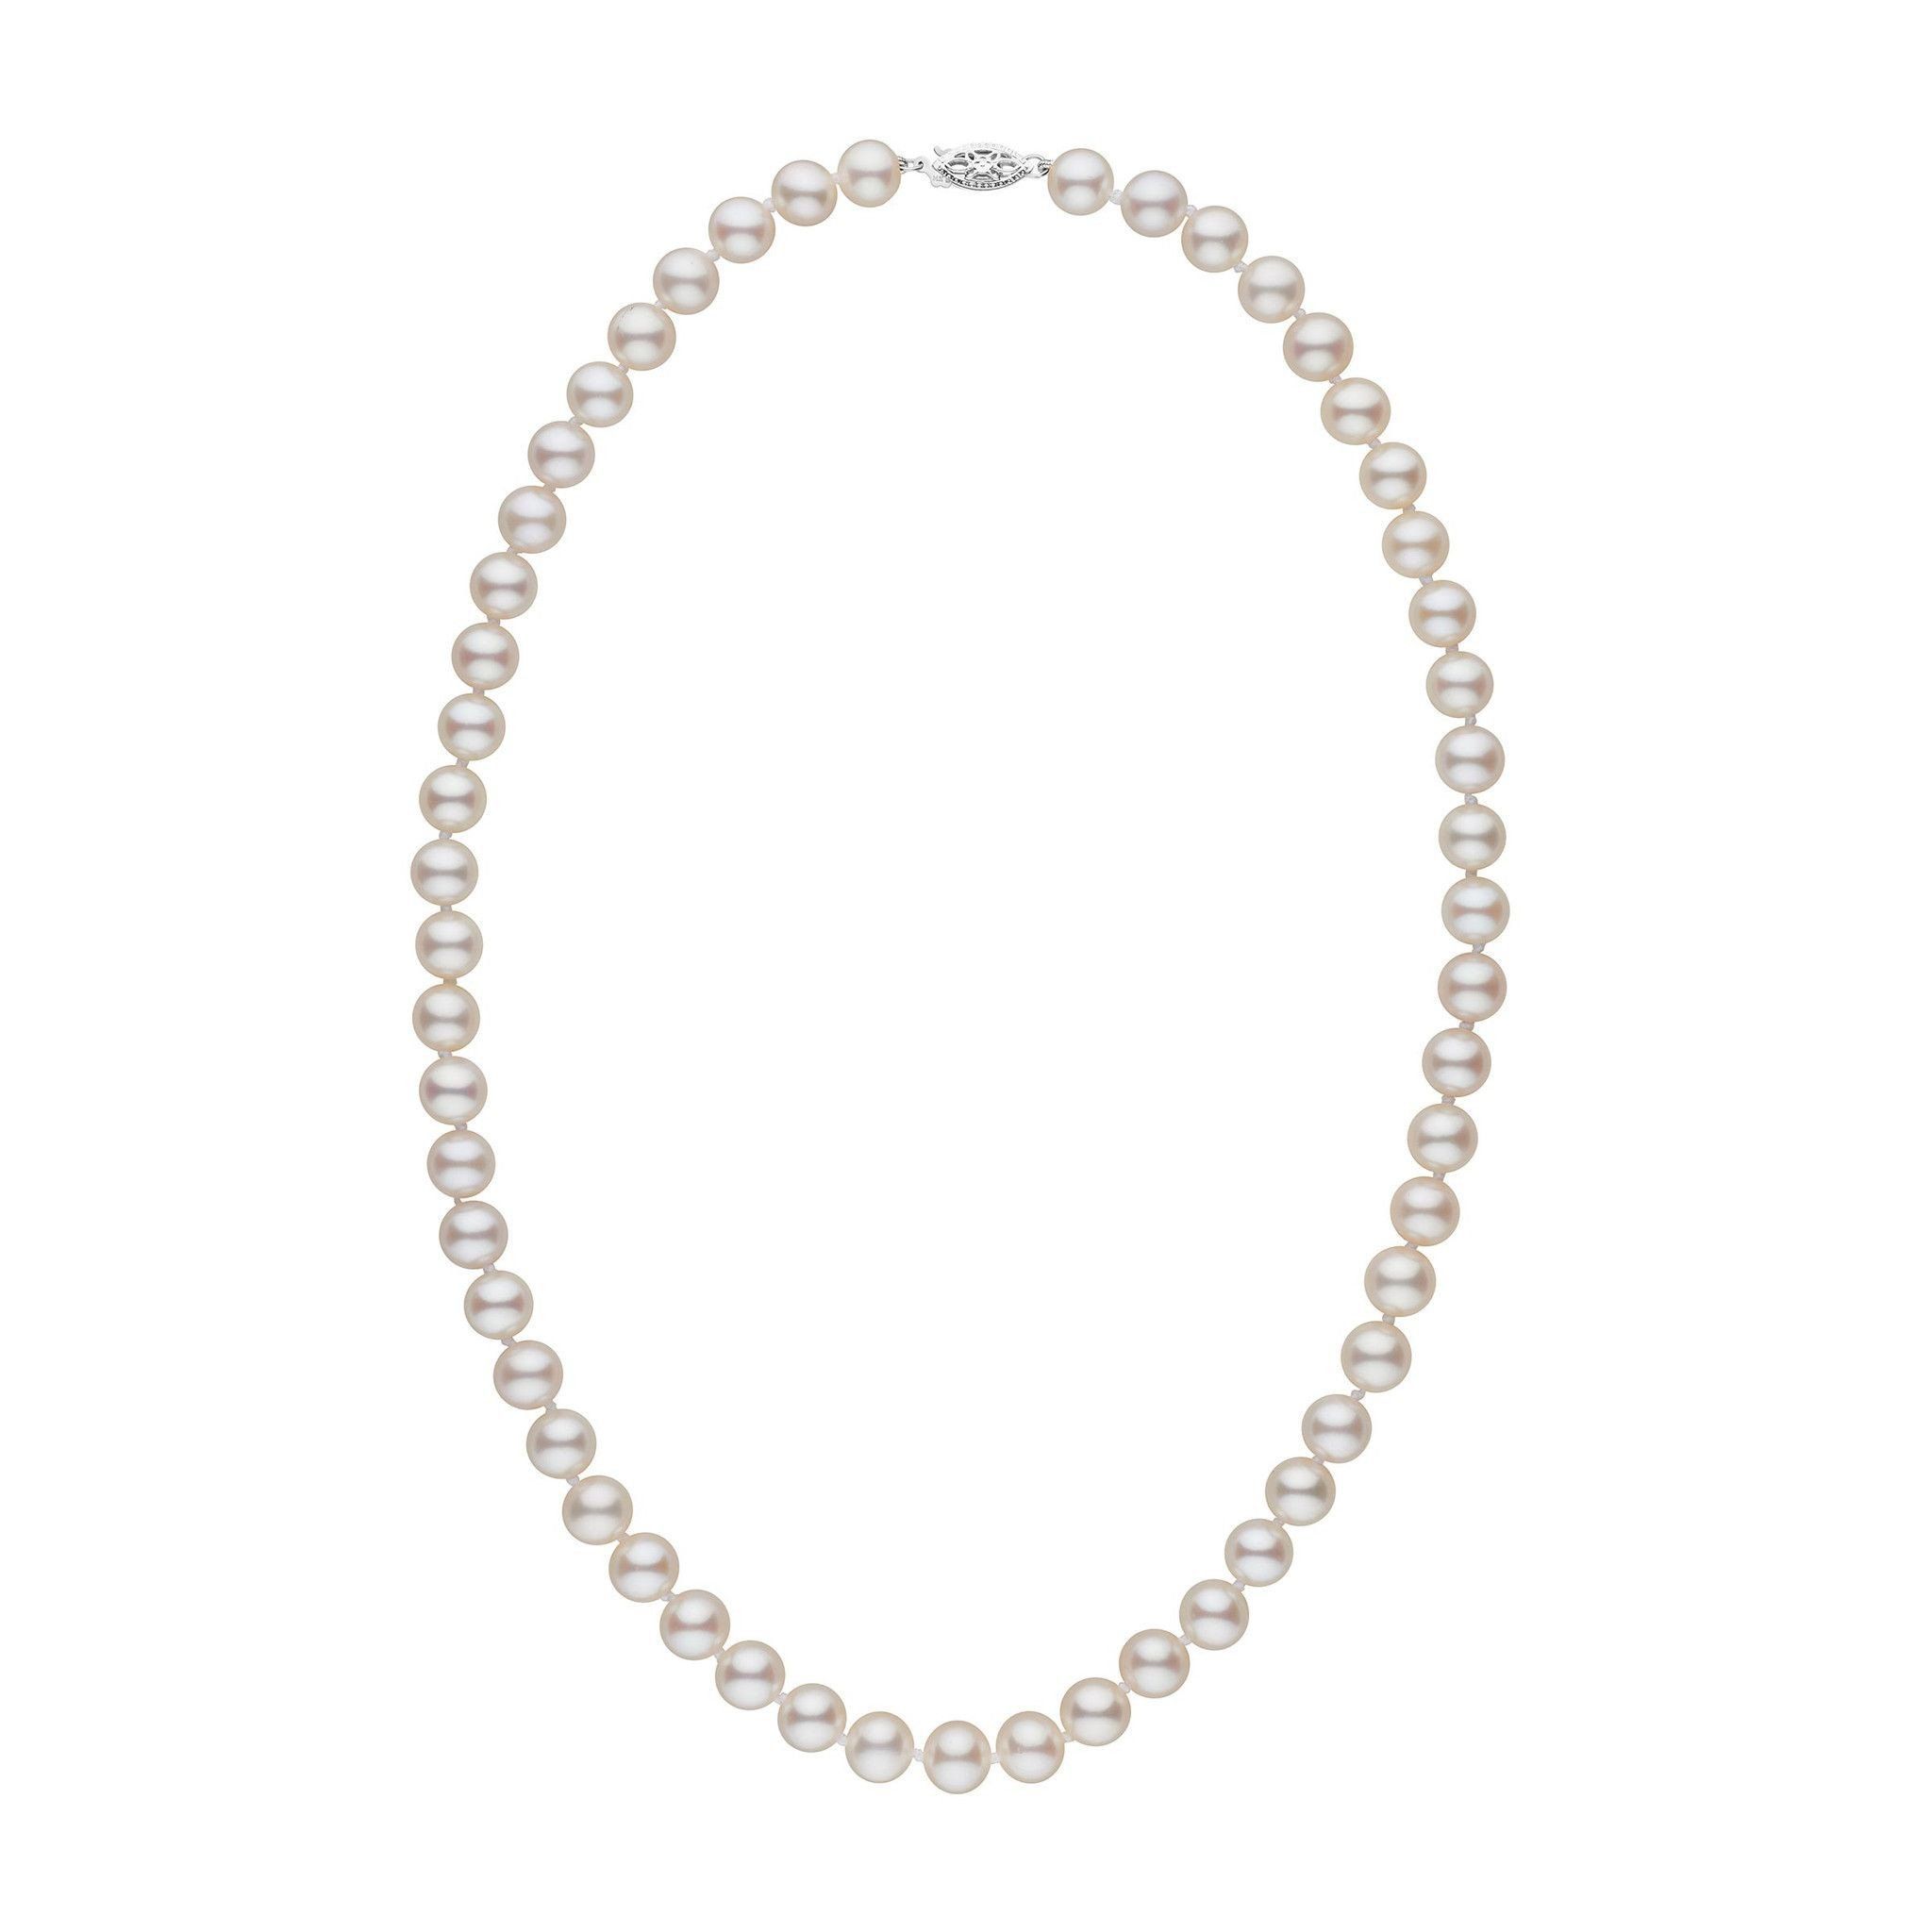 High Fashion Choker 4 Strand Pearl Necklace Large Sparkling RS Medalli –  Olde Kitchen & Home